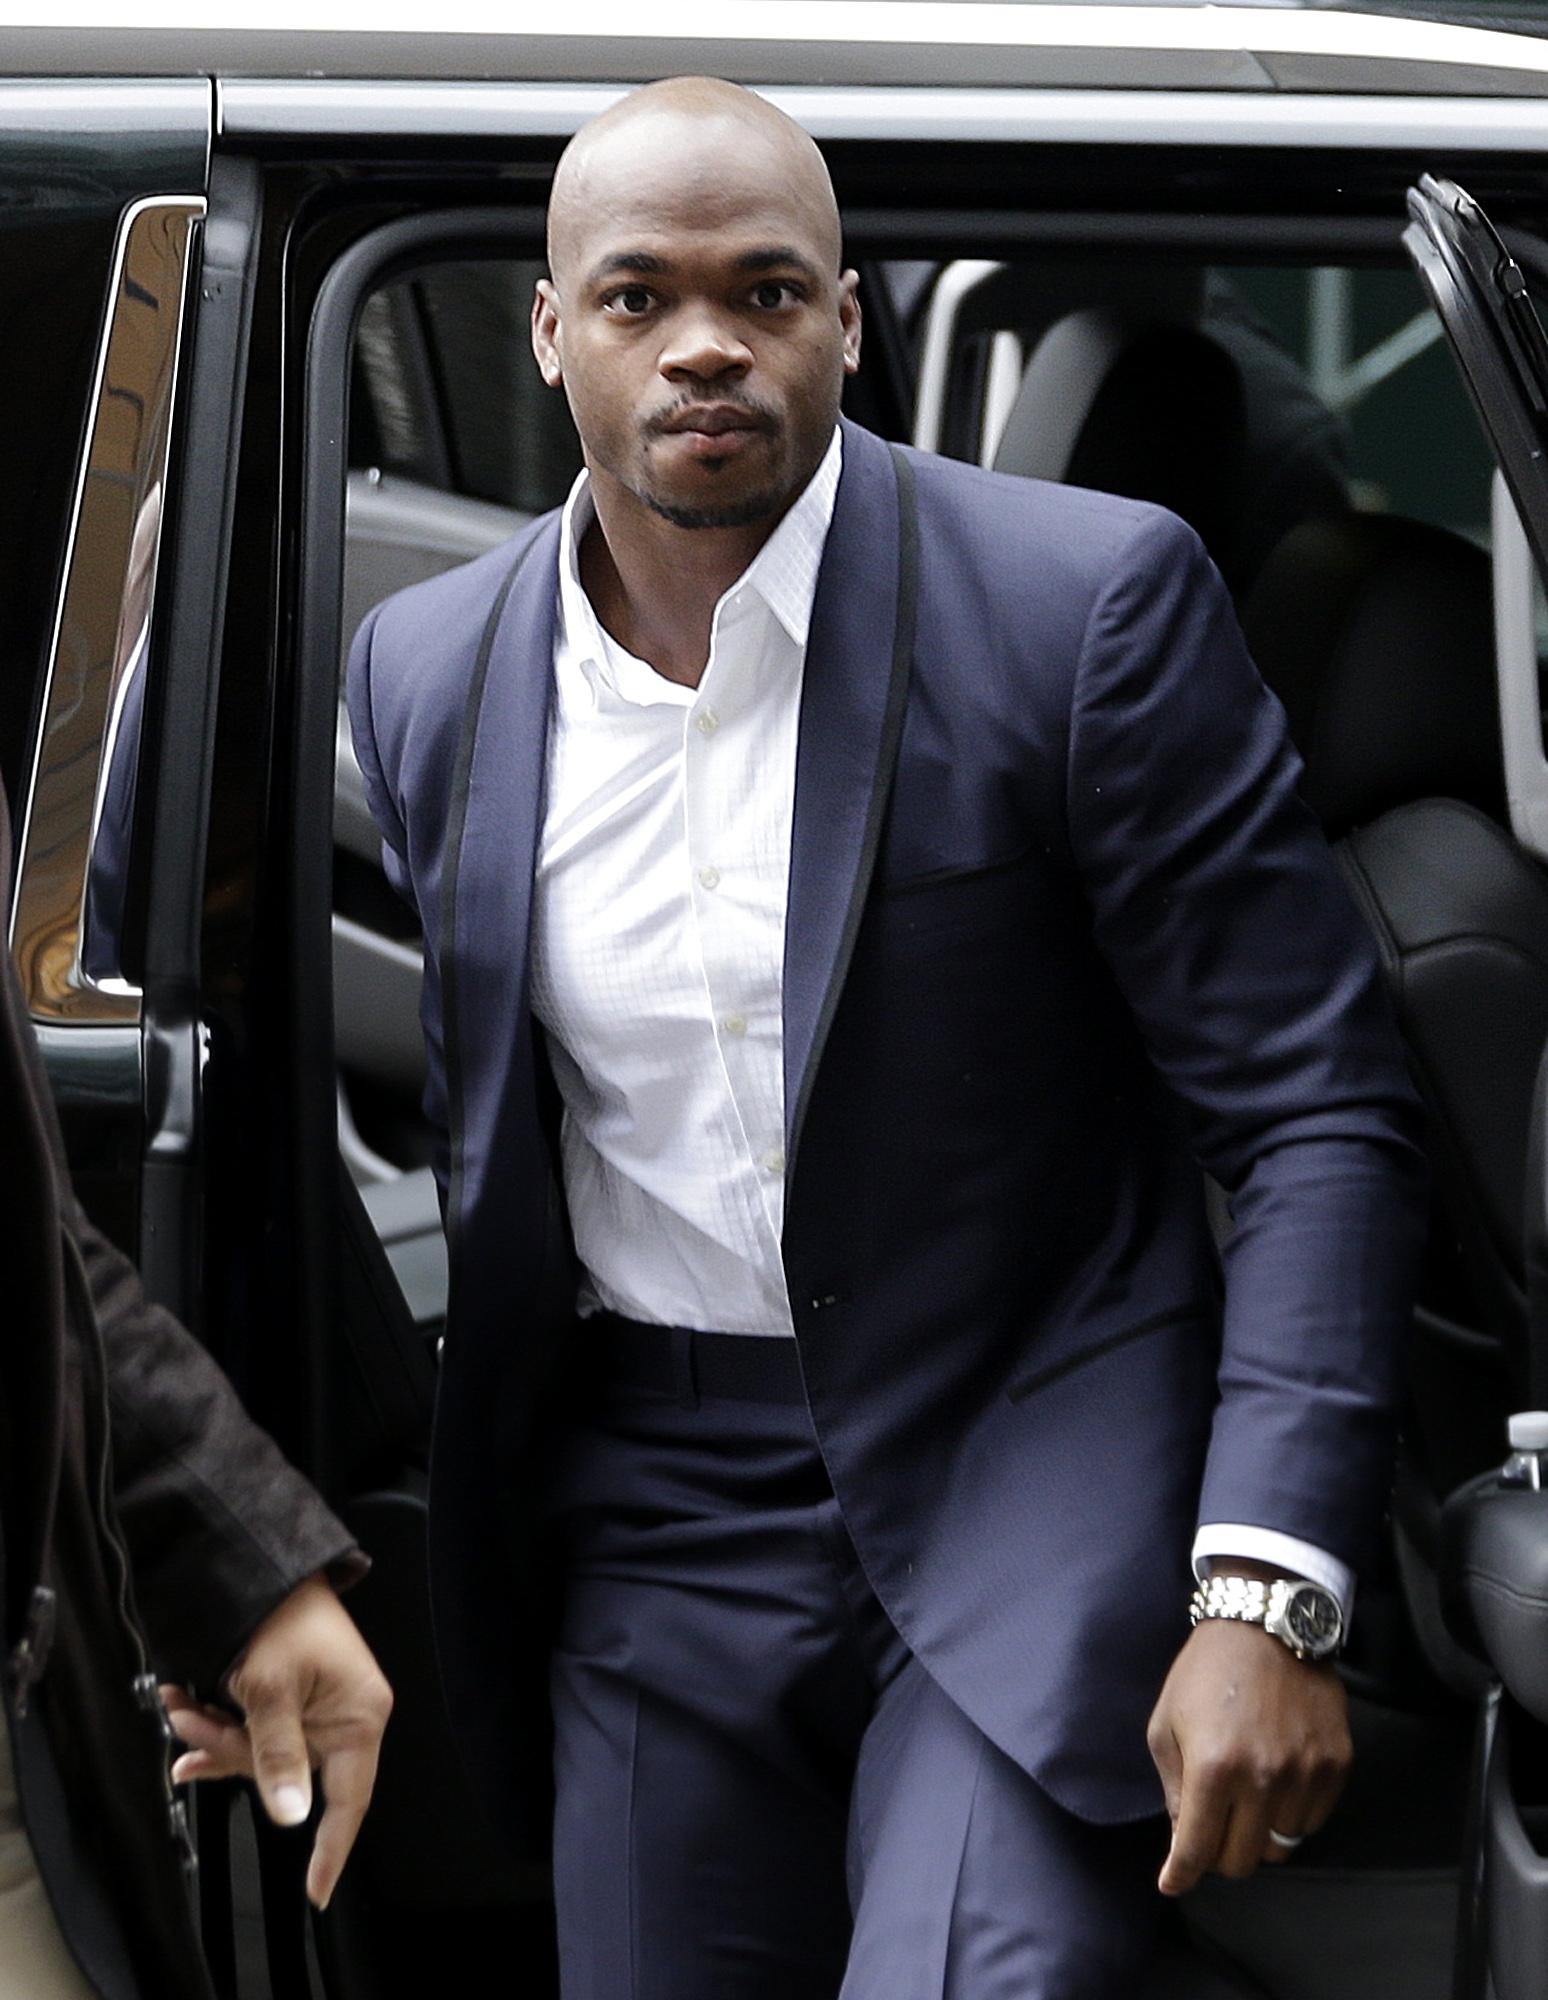 Minnesota Vikings' Adrian Peterson arrives for a hearing for the appeal of his suspension in New York on Dec. 2, 2014.